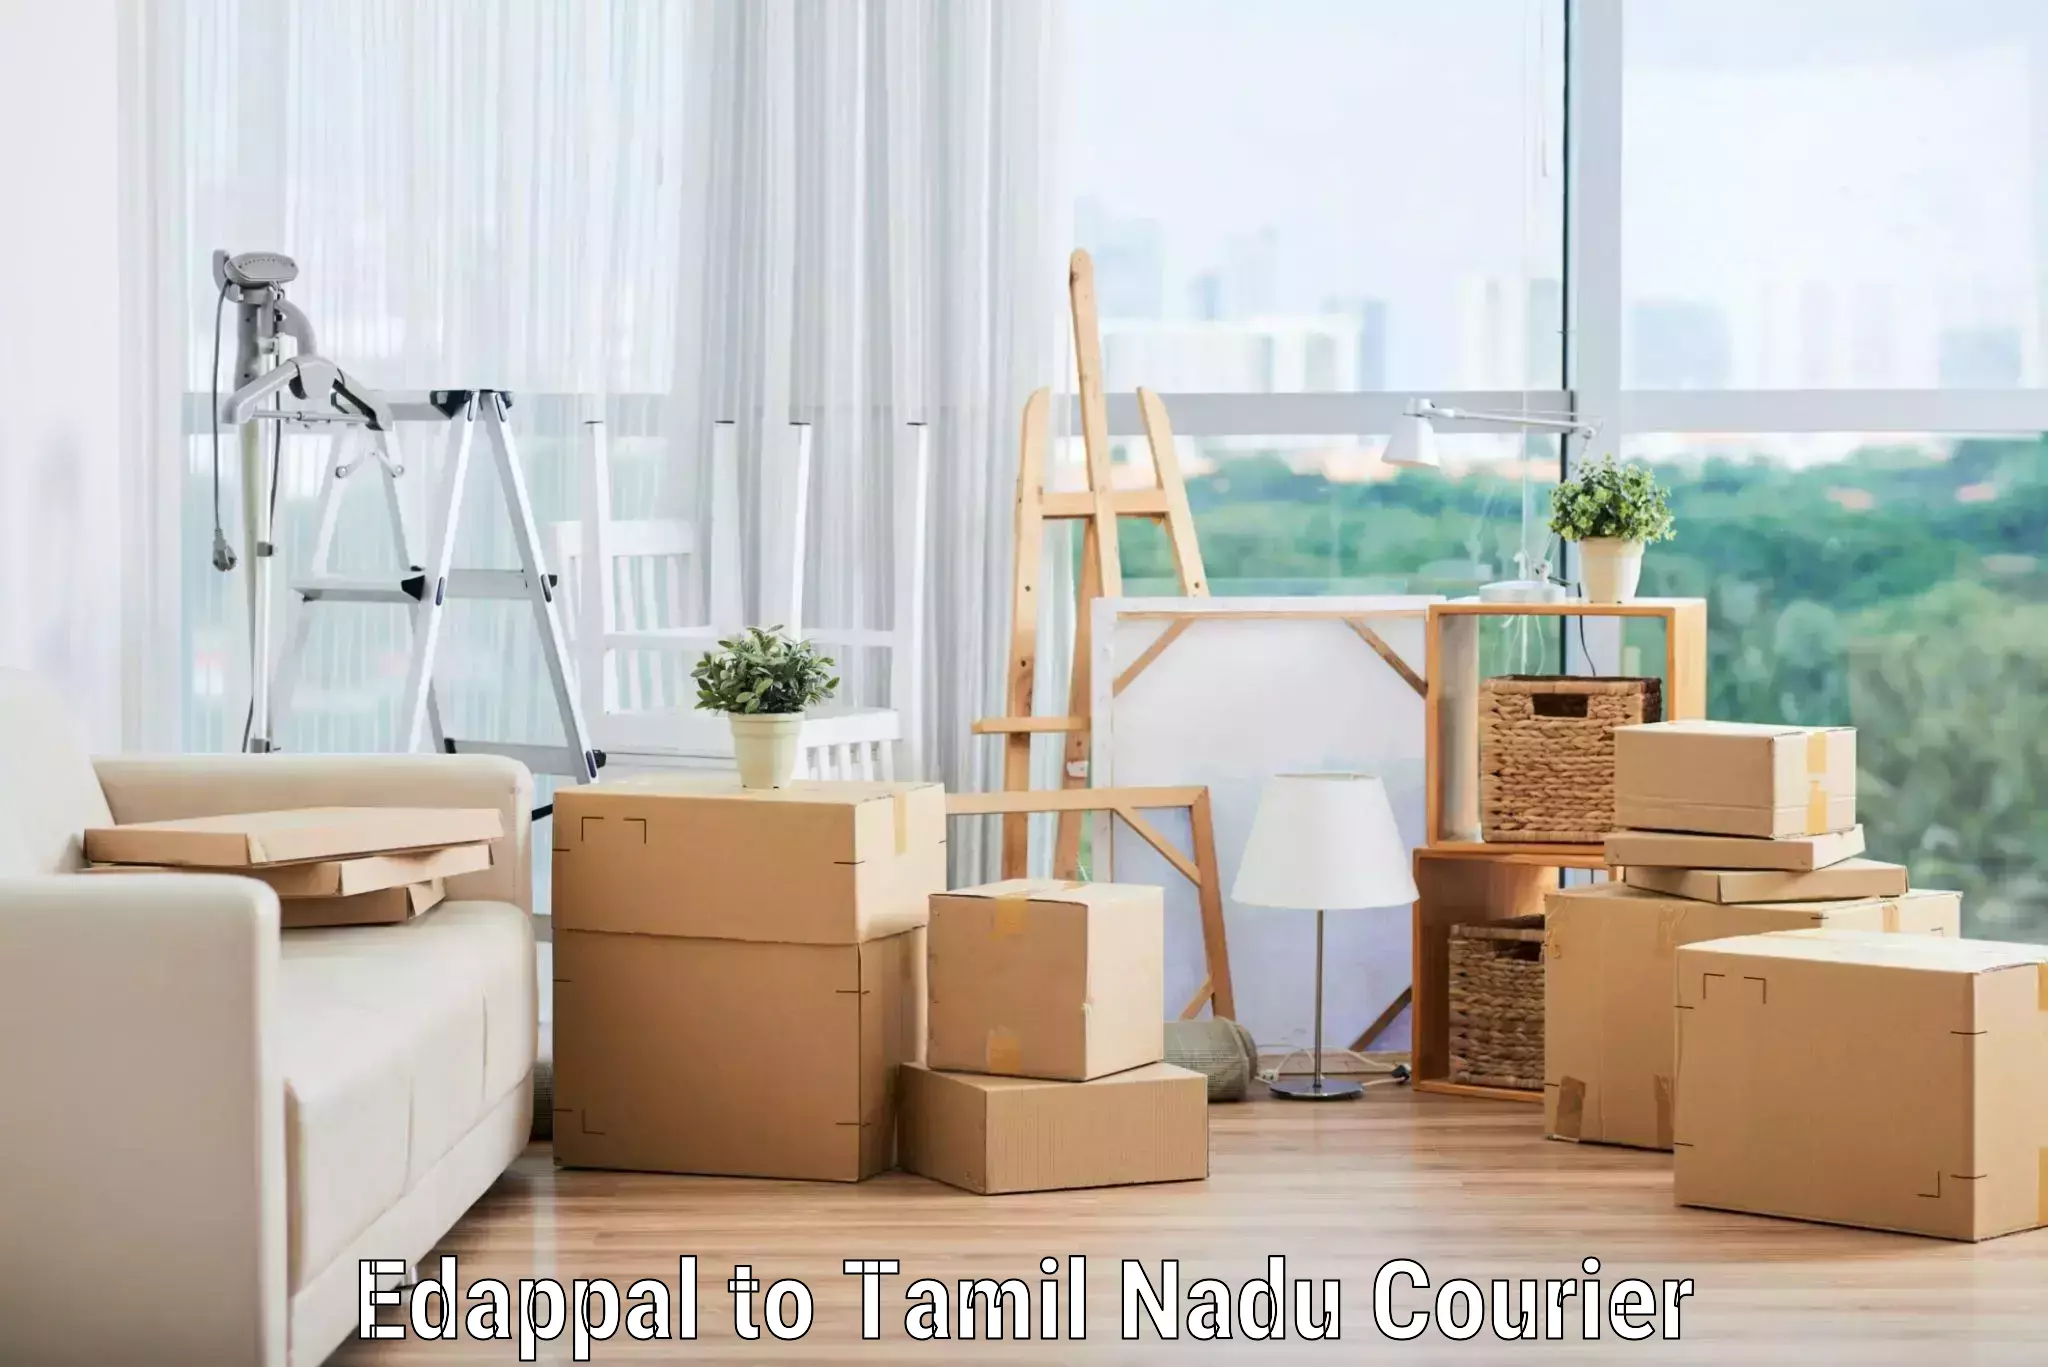 Full home relocation services Edappal to Virudhunagar